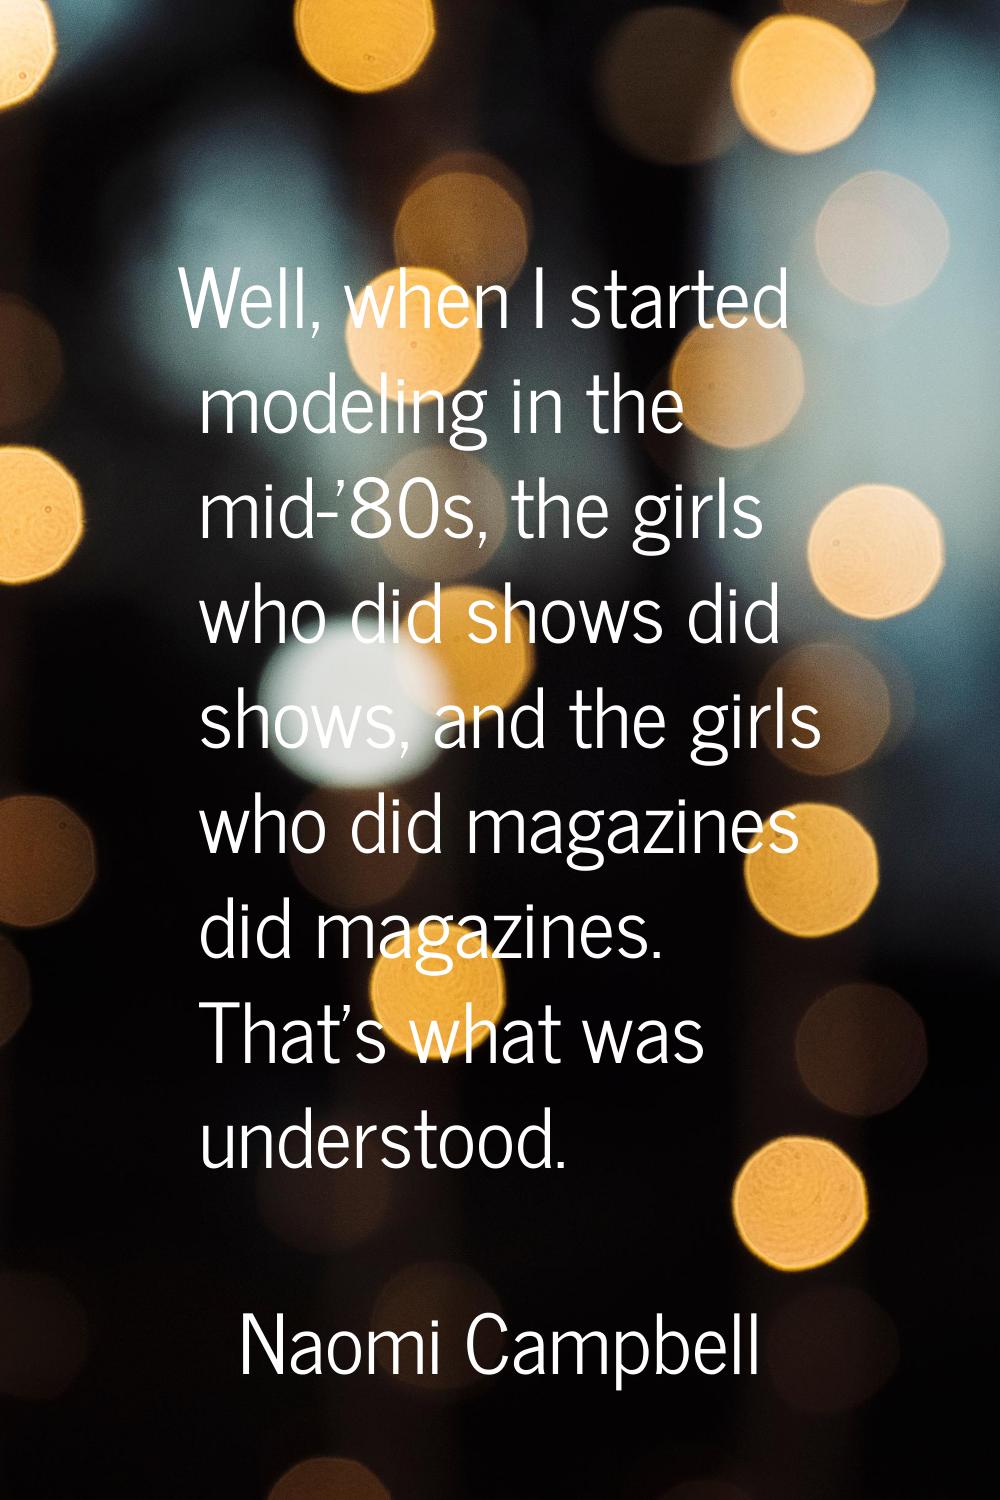 Well, when I started modeling in the mid-'80s, the girls who did shows did shows, and the girls who